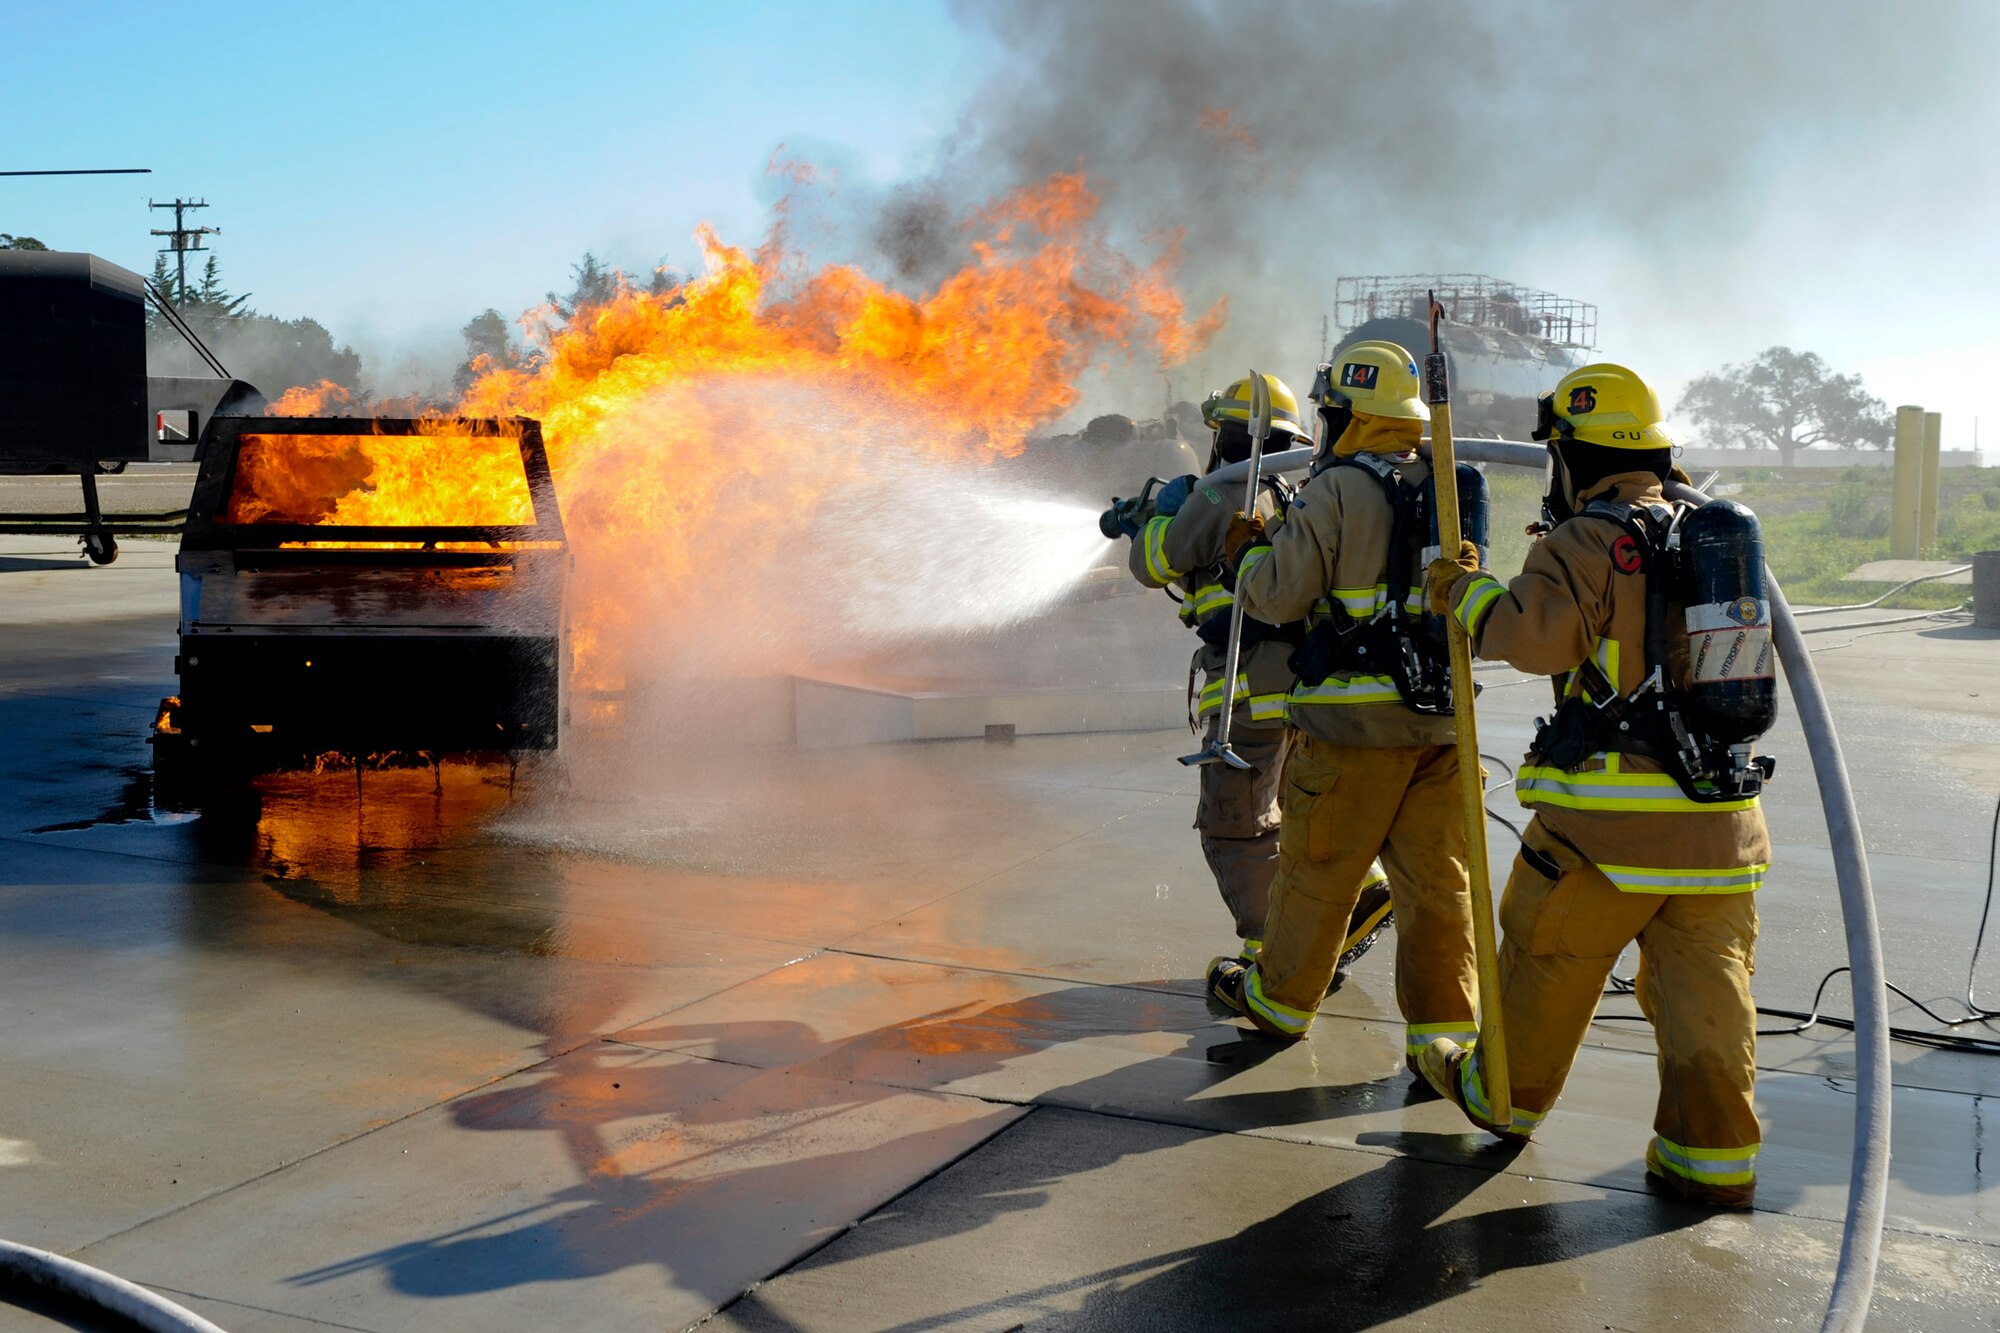 VANDENBERG AIR FORCE BASE, Calif. – A car fire gets extinguished by student firefighters from Allen Hancock College Fire Academy during training at the Turner Bell Fire Training Campus here Wednesday, Nov. 30, 2011. . Allen Hancock College students trained at Vandenberg to help build the required skills while their Public Safety Complex, which will incorporate skill training facilities, is under construction. (U.S. Air Force photo/Staff Sgt. Levi Riendeau)